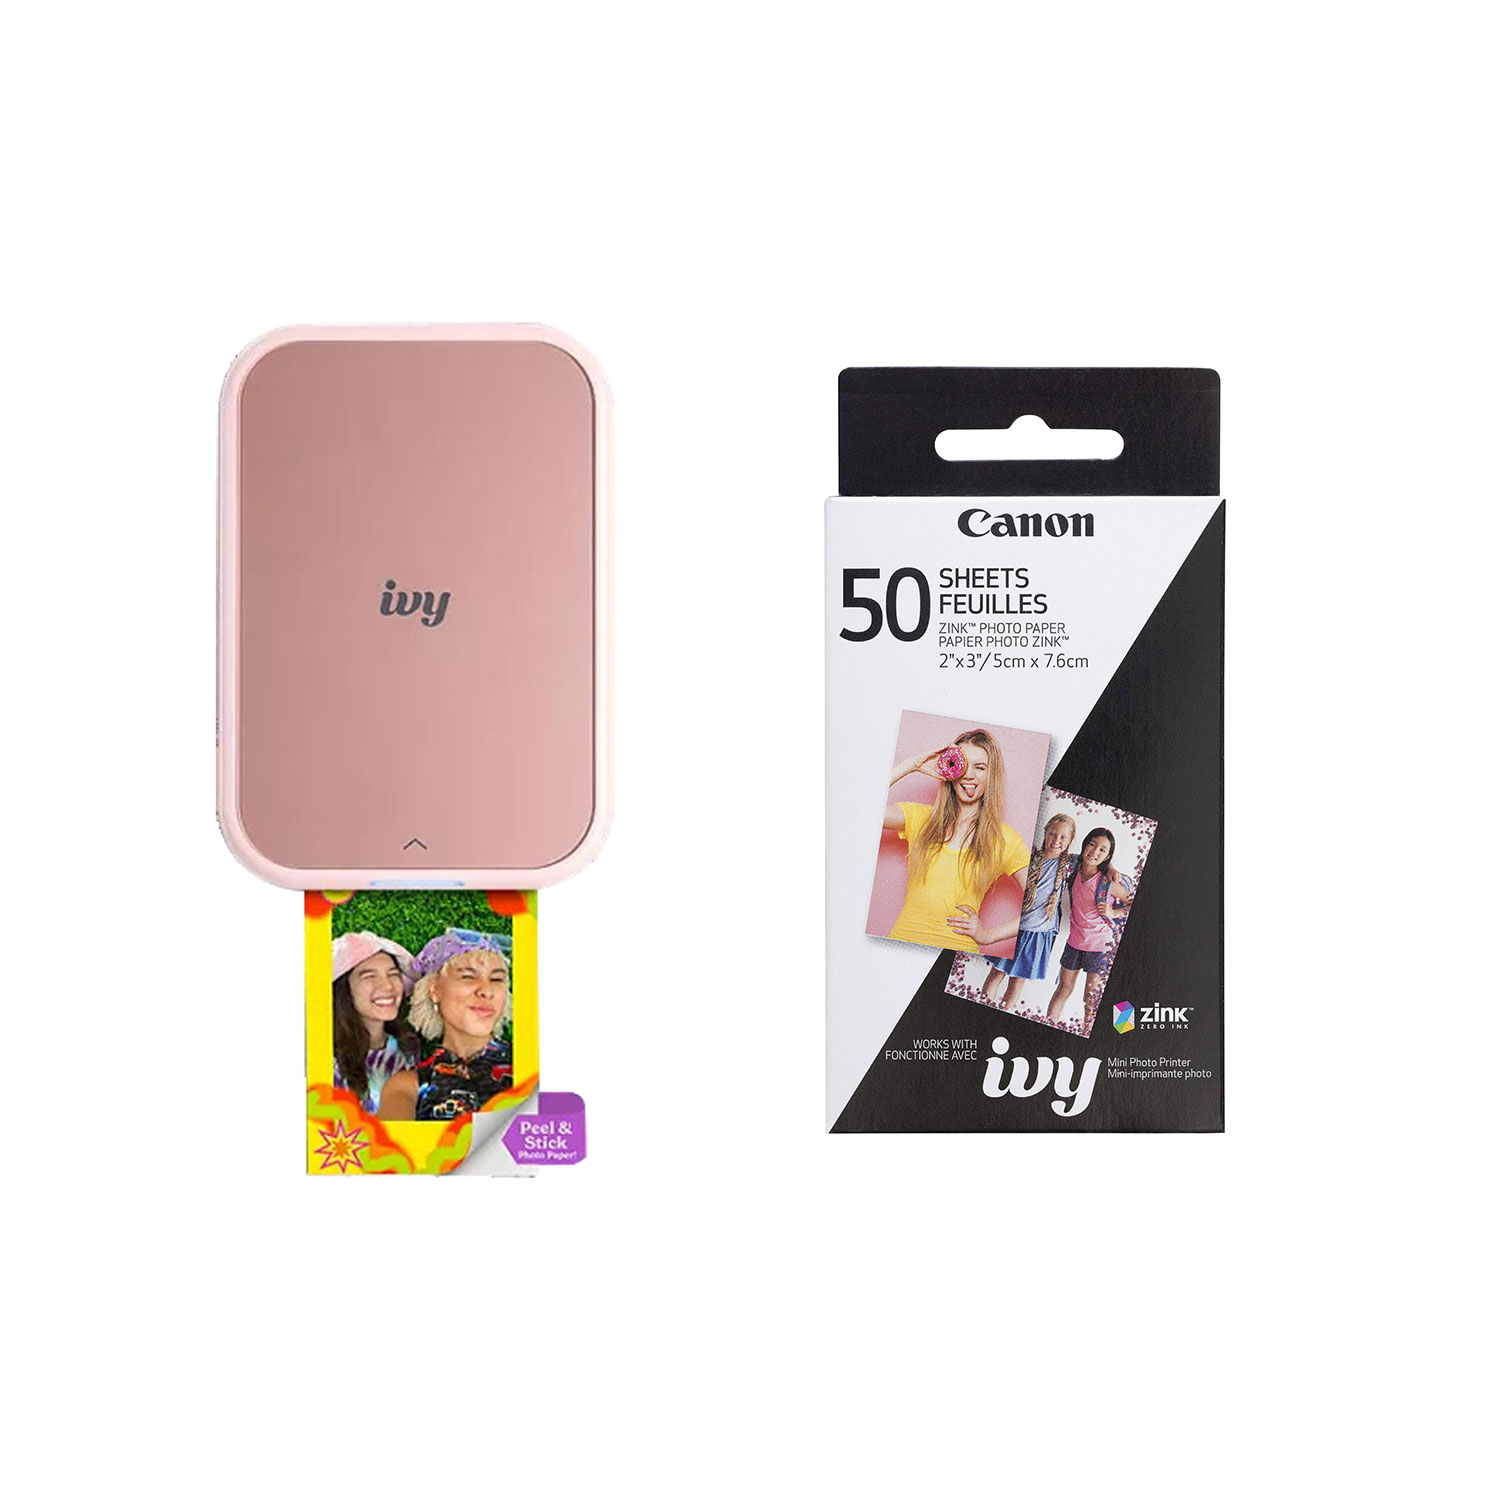 Canon IVY 2 Mini Wireless Photo Printer - Blush Pink with Photo Paper ( 50 Sheets)